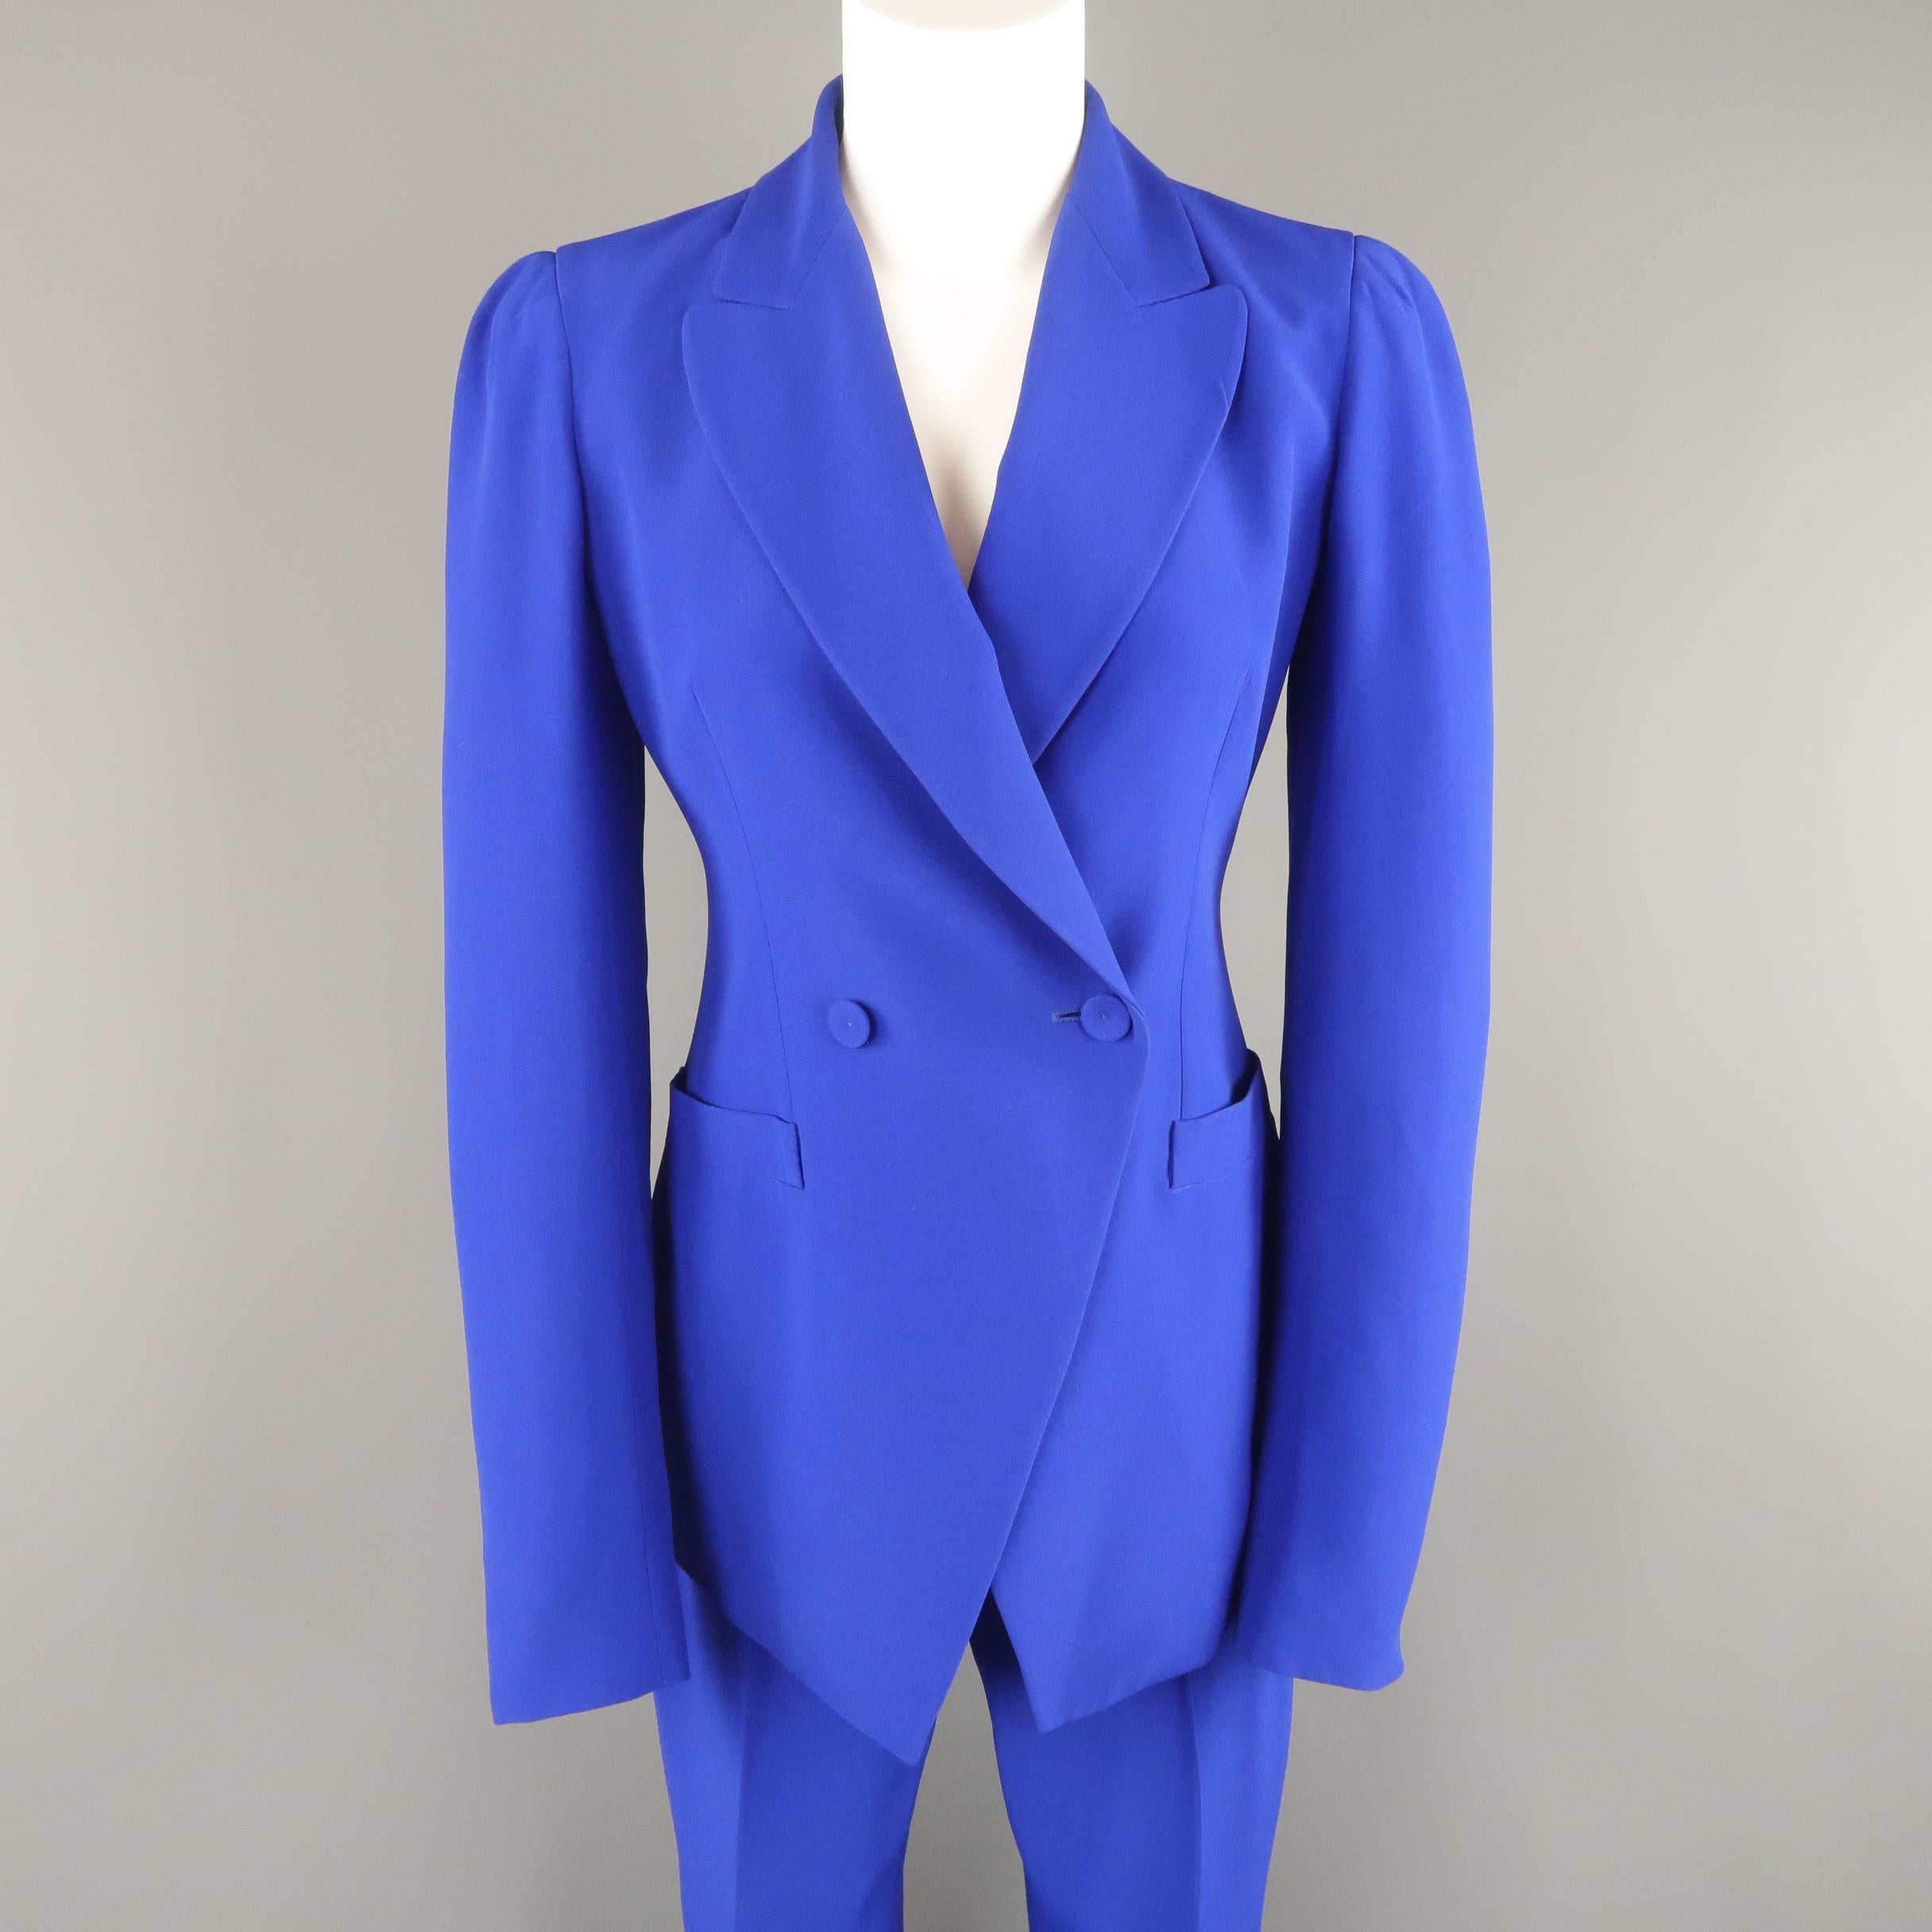 ALEXANDER MCQUEEN pants suit comes in bold cobalt blue crepe and includes a double breasted, peak lapel, pleated shoulder sport jacket and matching flat front flared trousers. Made in Italy.
 
Very Good Pre-Owned Condition.
Marked: Blazer: IT 42